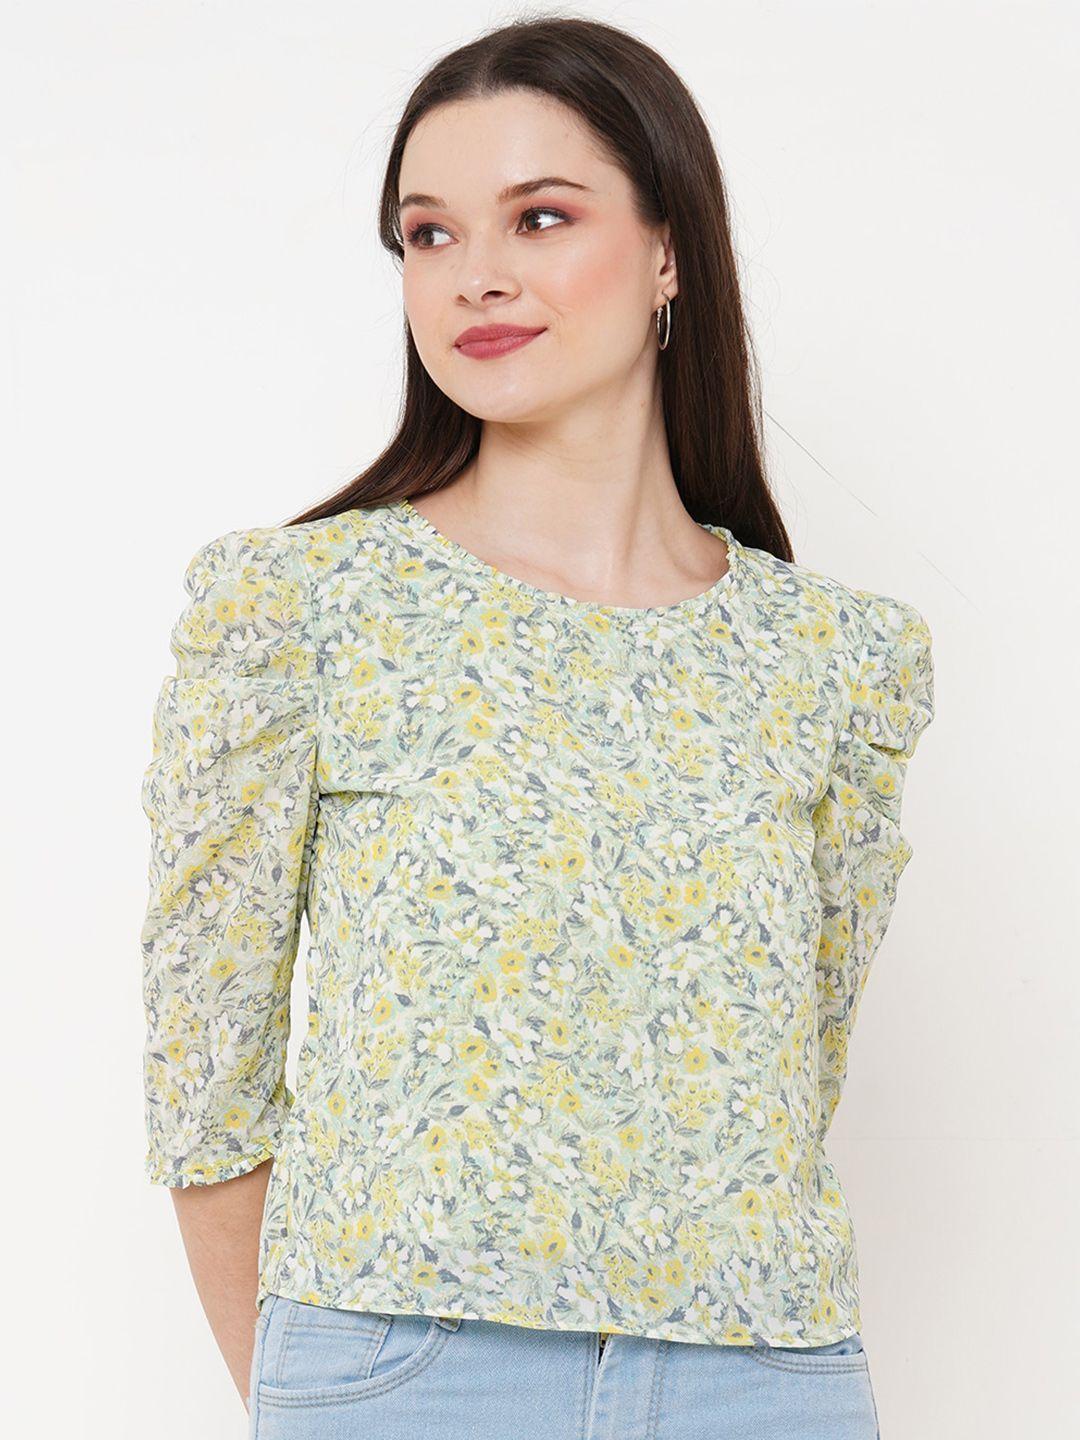 mish green & yellow puff sleeves pleated floral printed top